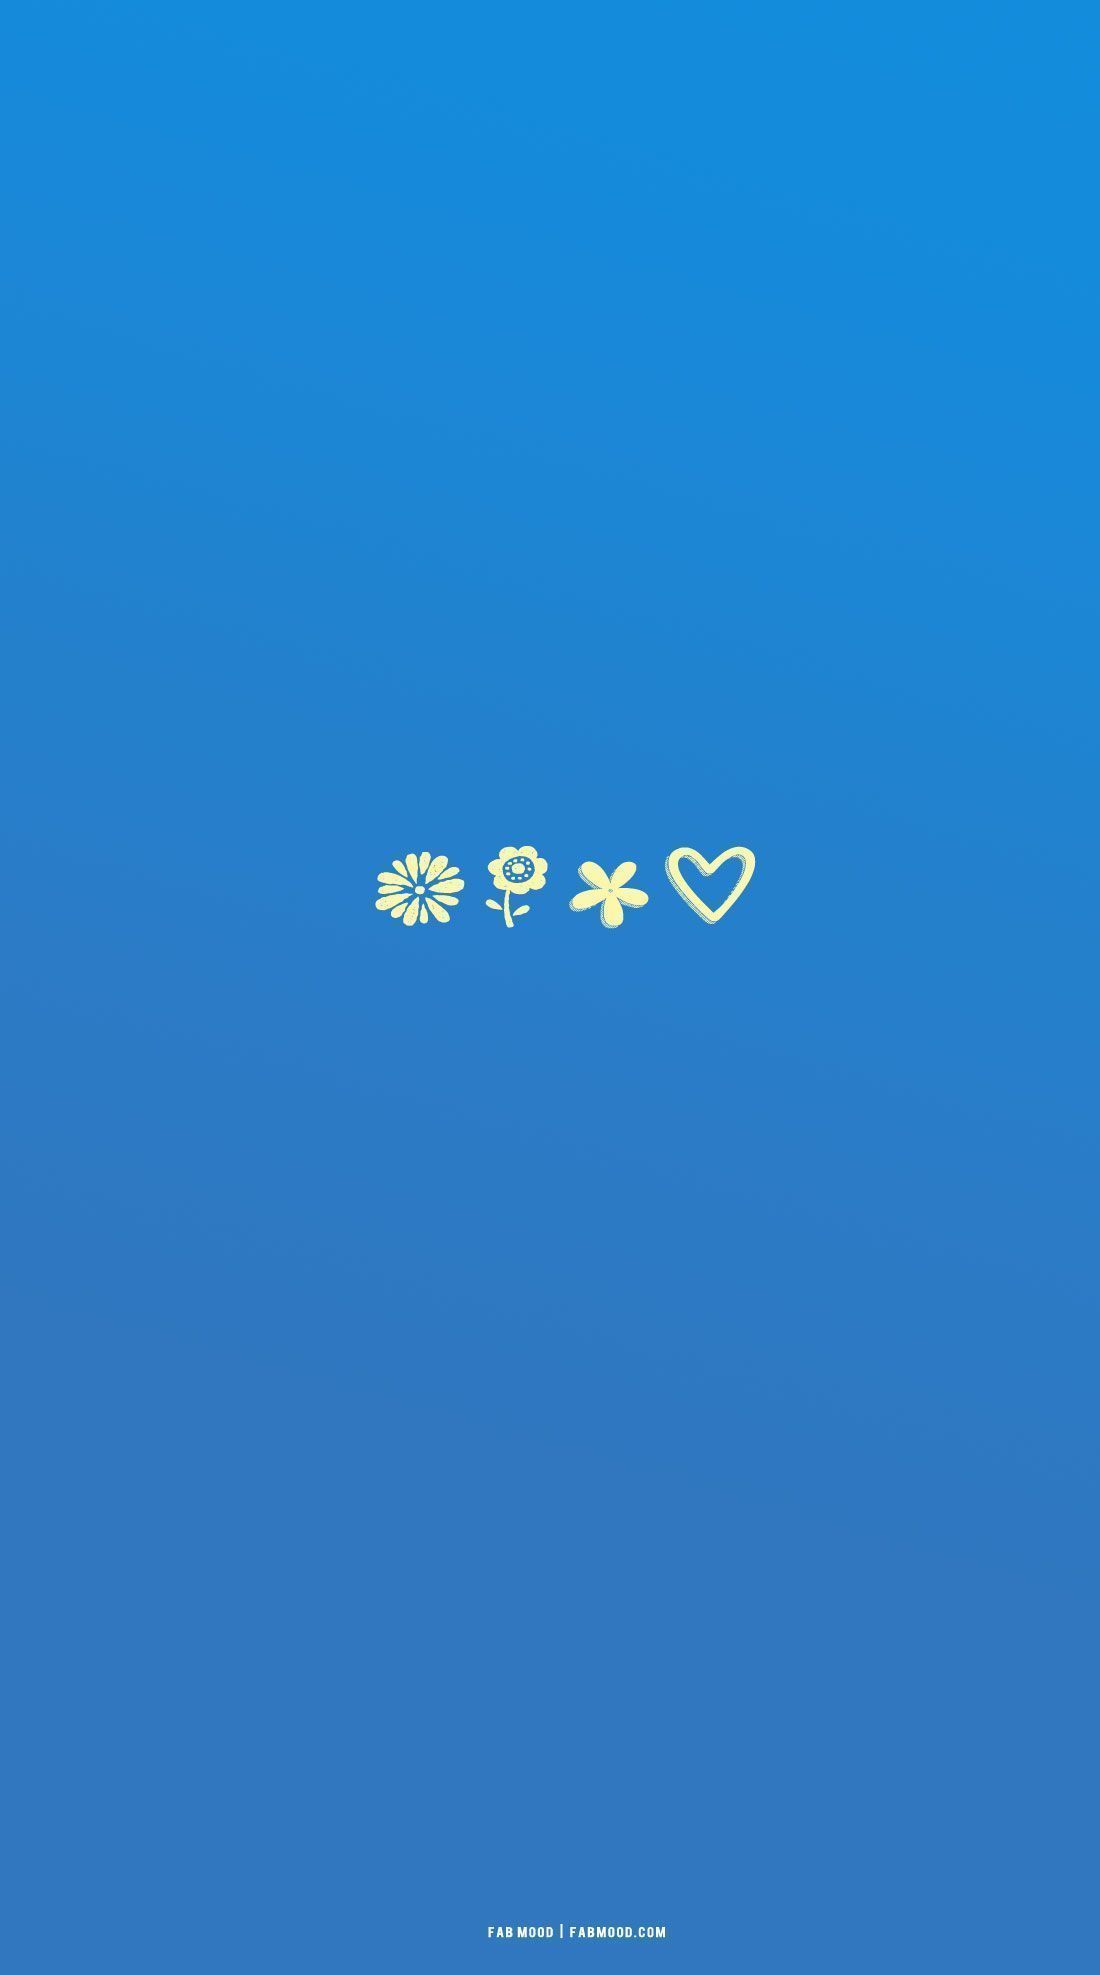 A blue background with three yellow flowers - Blue, yellow iphone, heart, November, phone, pastel yellow, flower, pretty, December